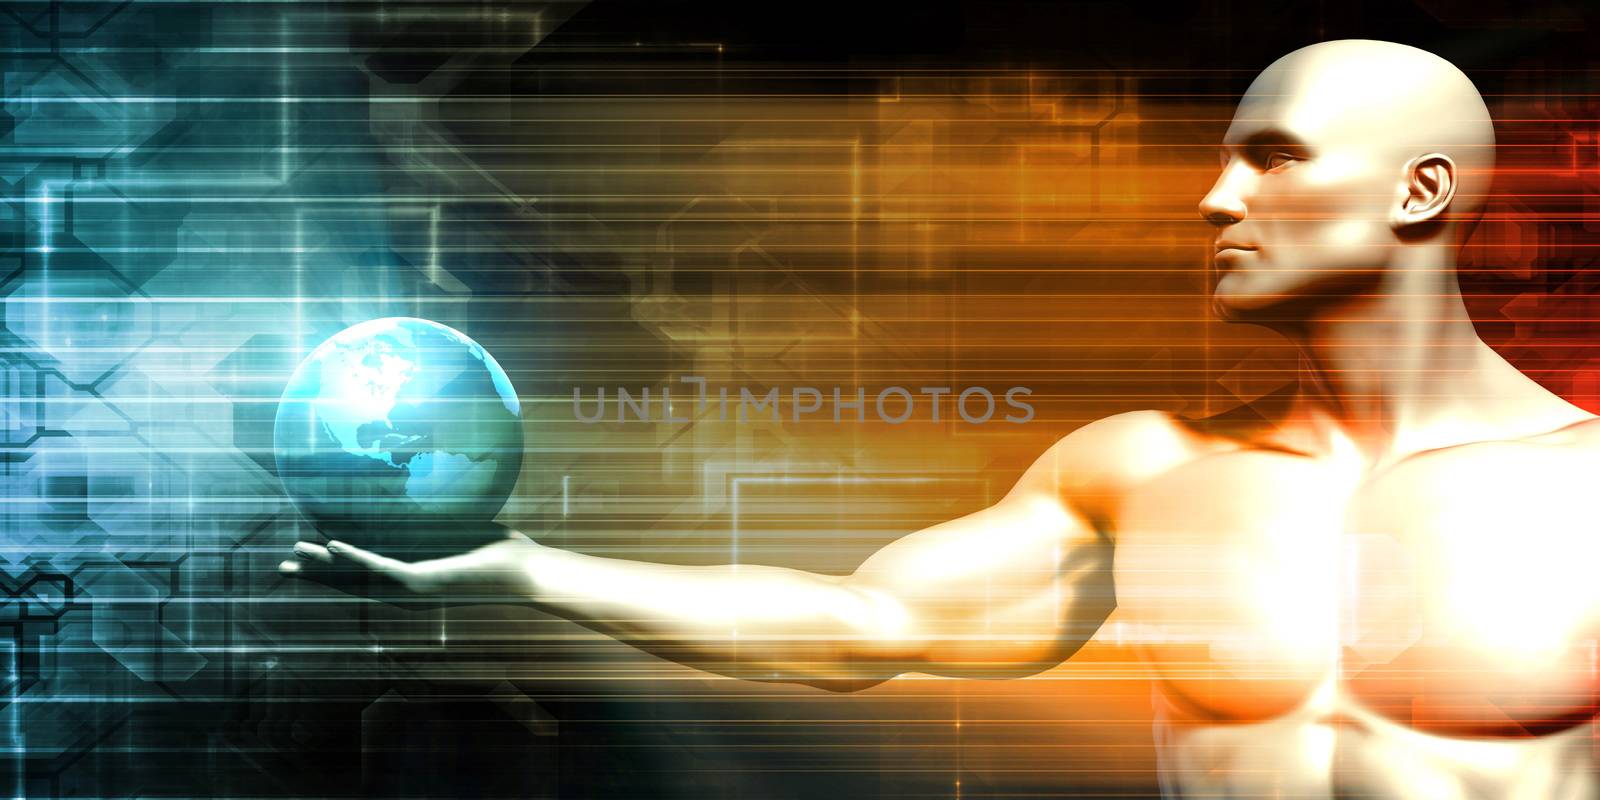 Futuristic Background with Businessman and Globe in Hands